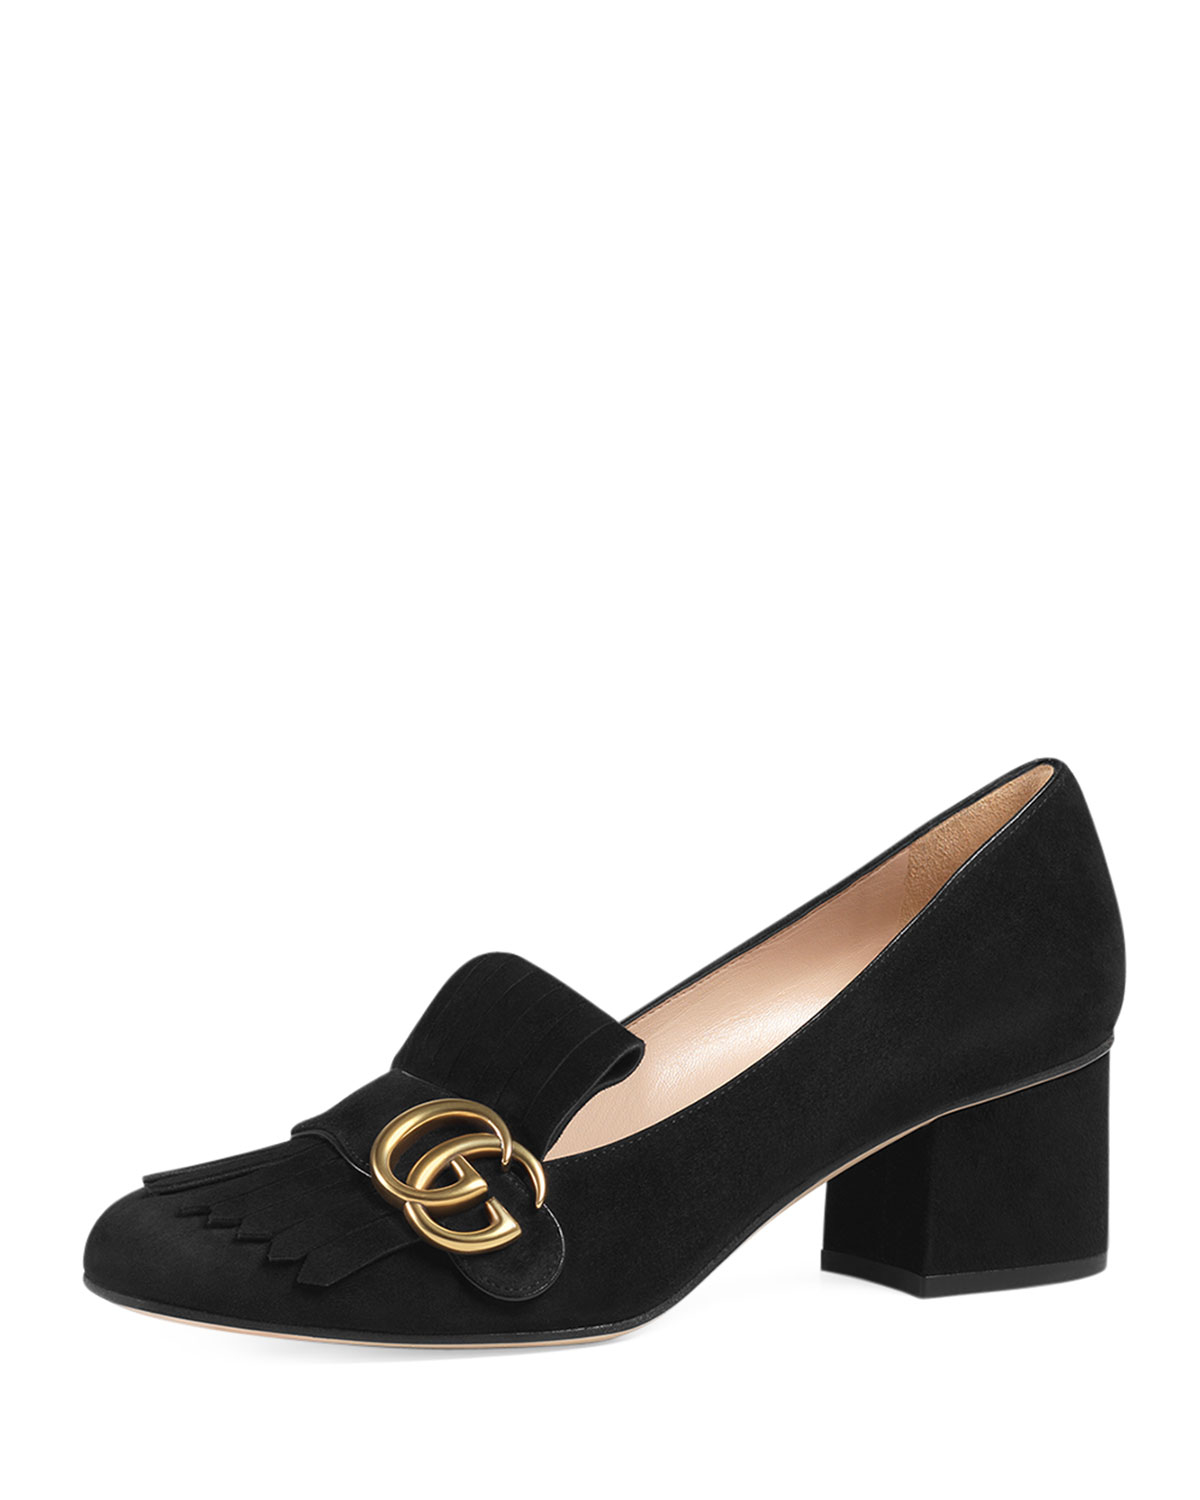 Gucci Marmont Fringed Loafers in Black - Lyst